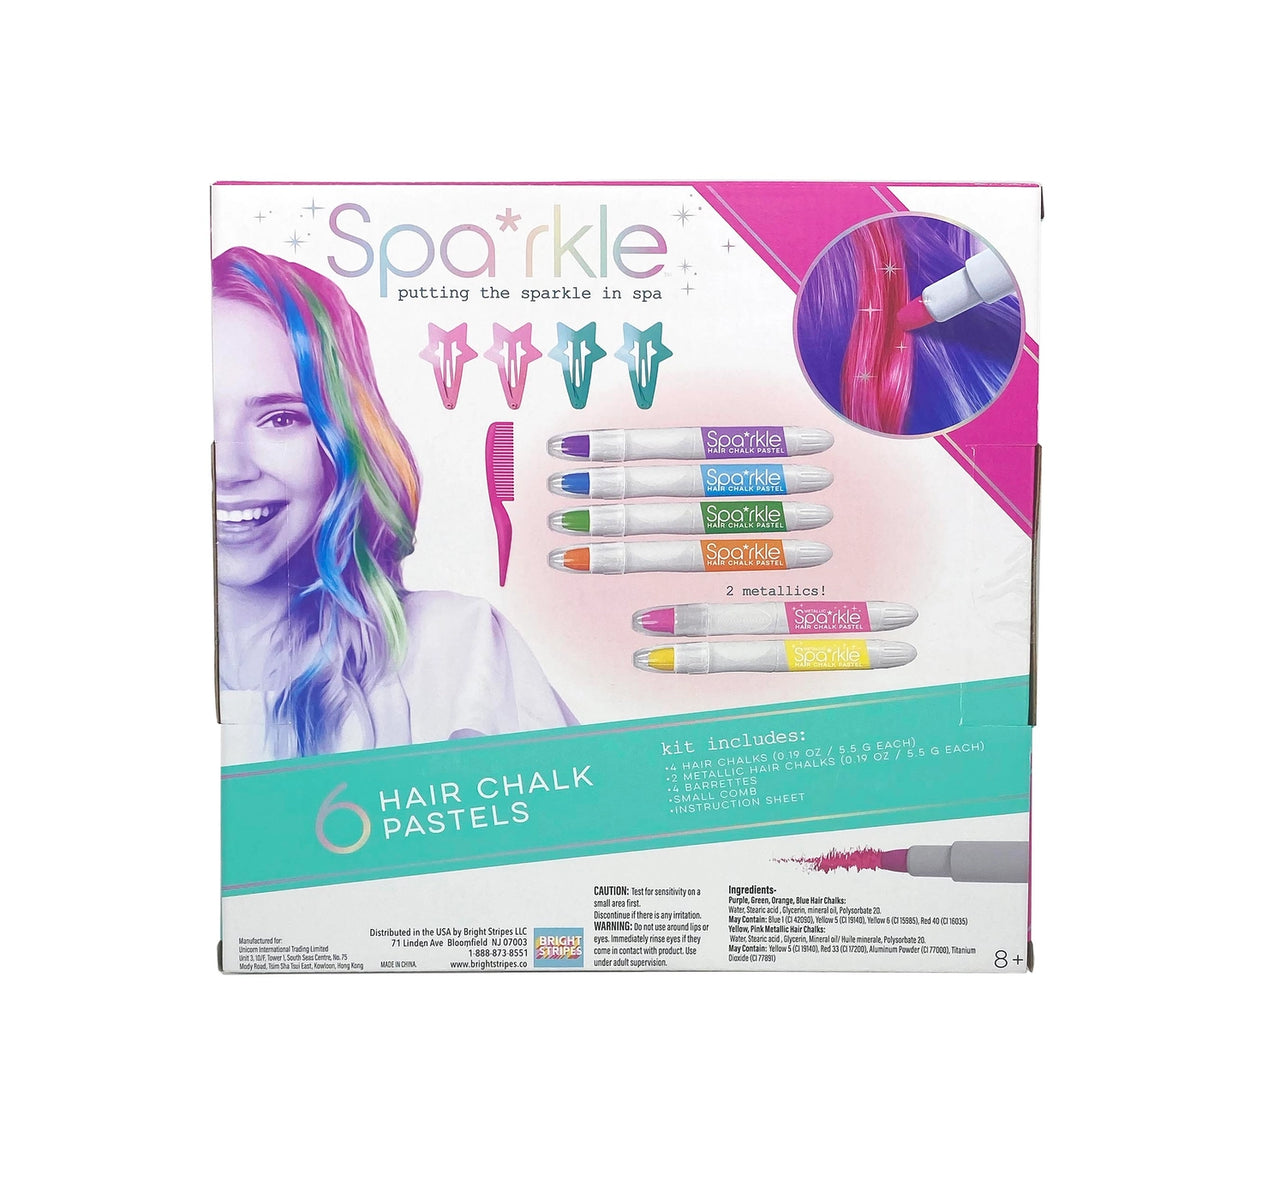 Spa*Rkle 6 Hair Chalk Pastels and Barrettes